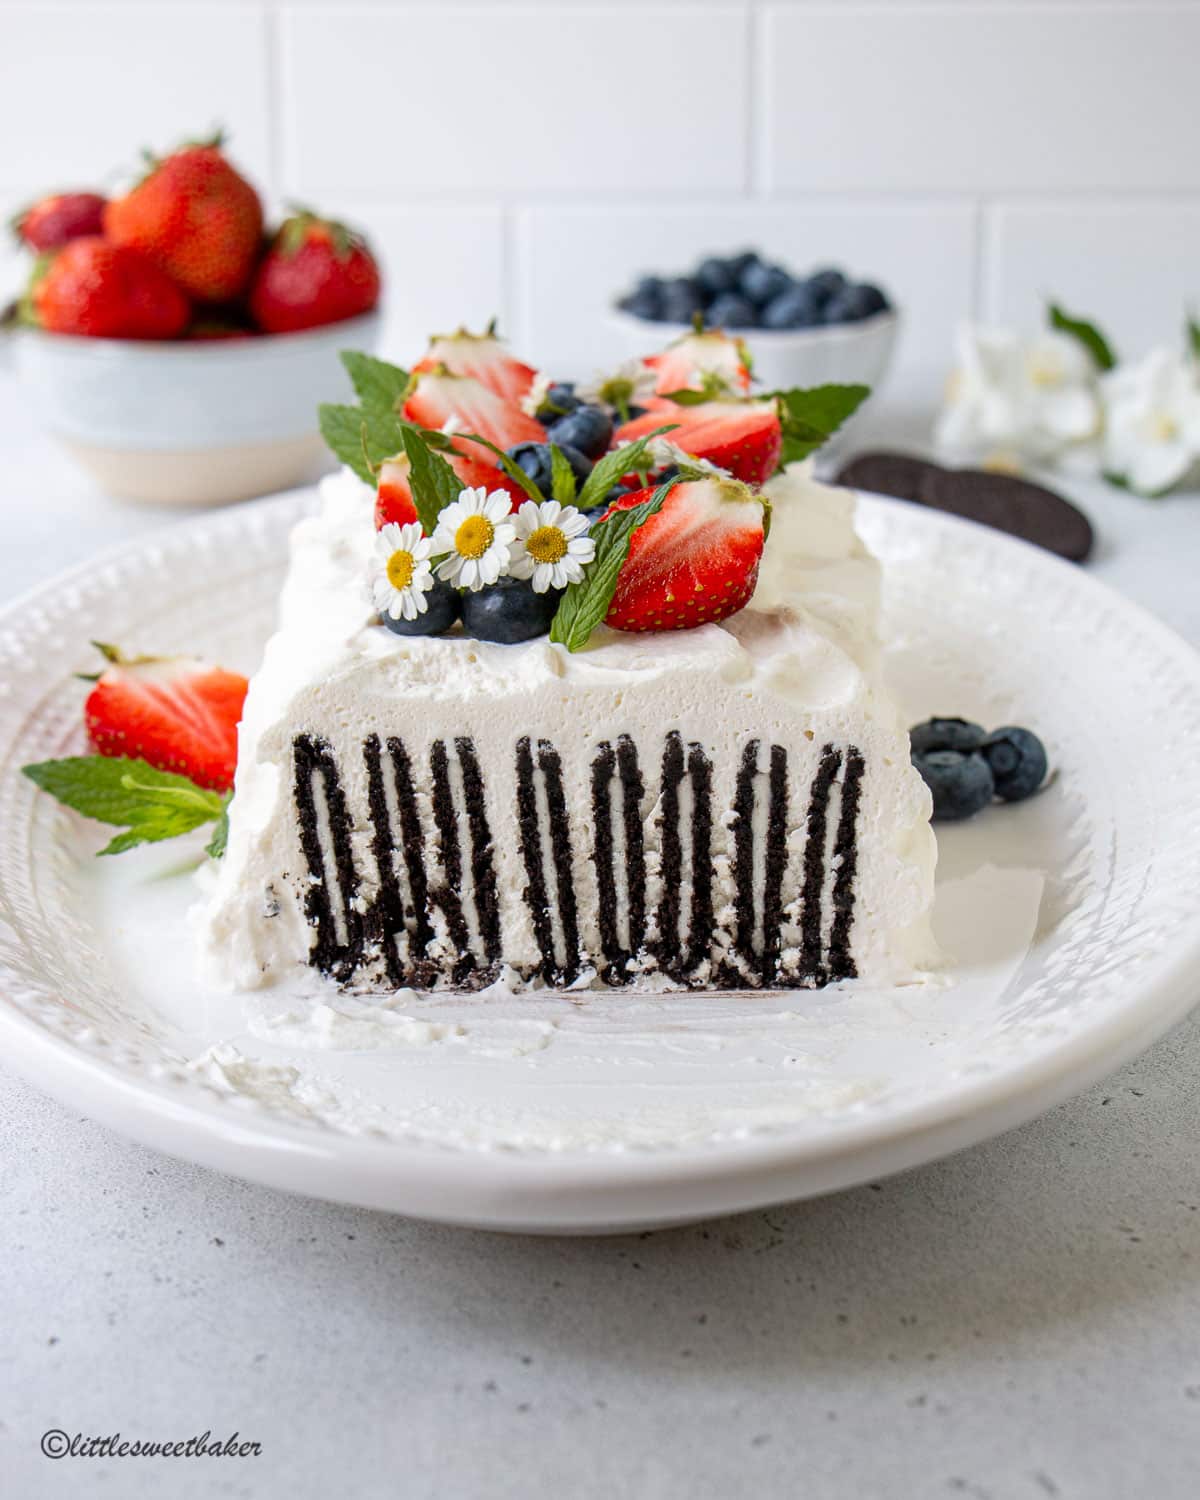 An icebox cake made with Oreos on a white plate topped with strawberries, blueberries, white flowers, and mint.